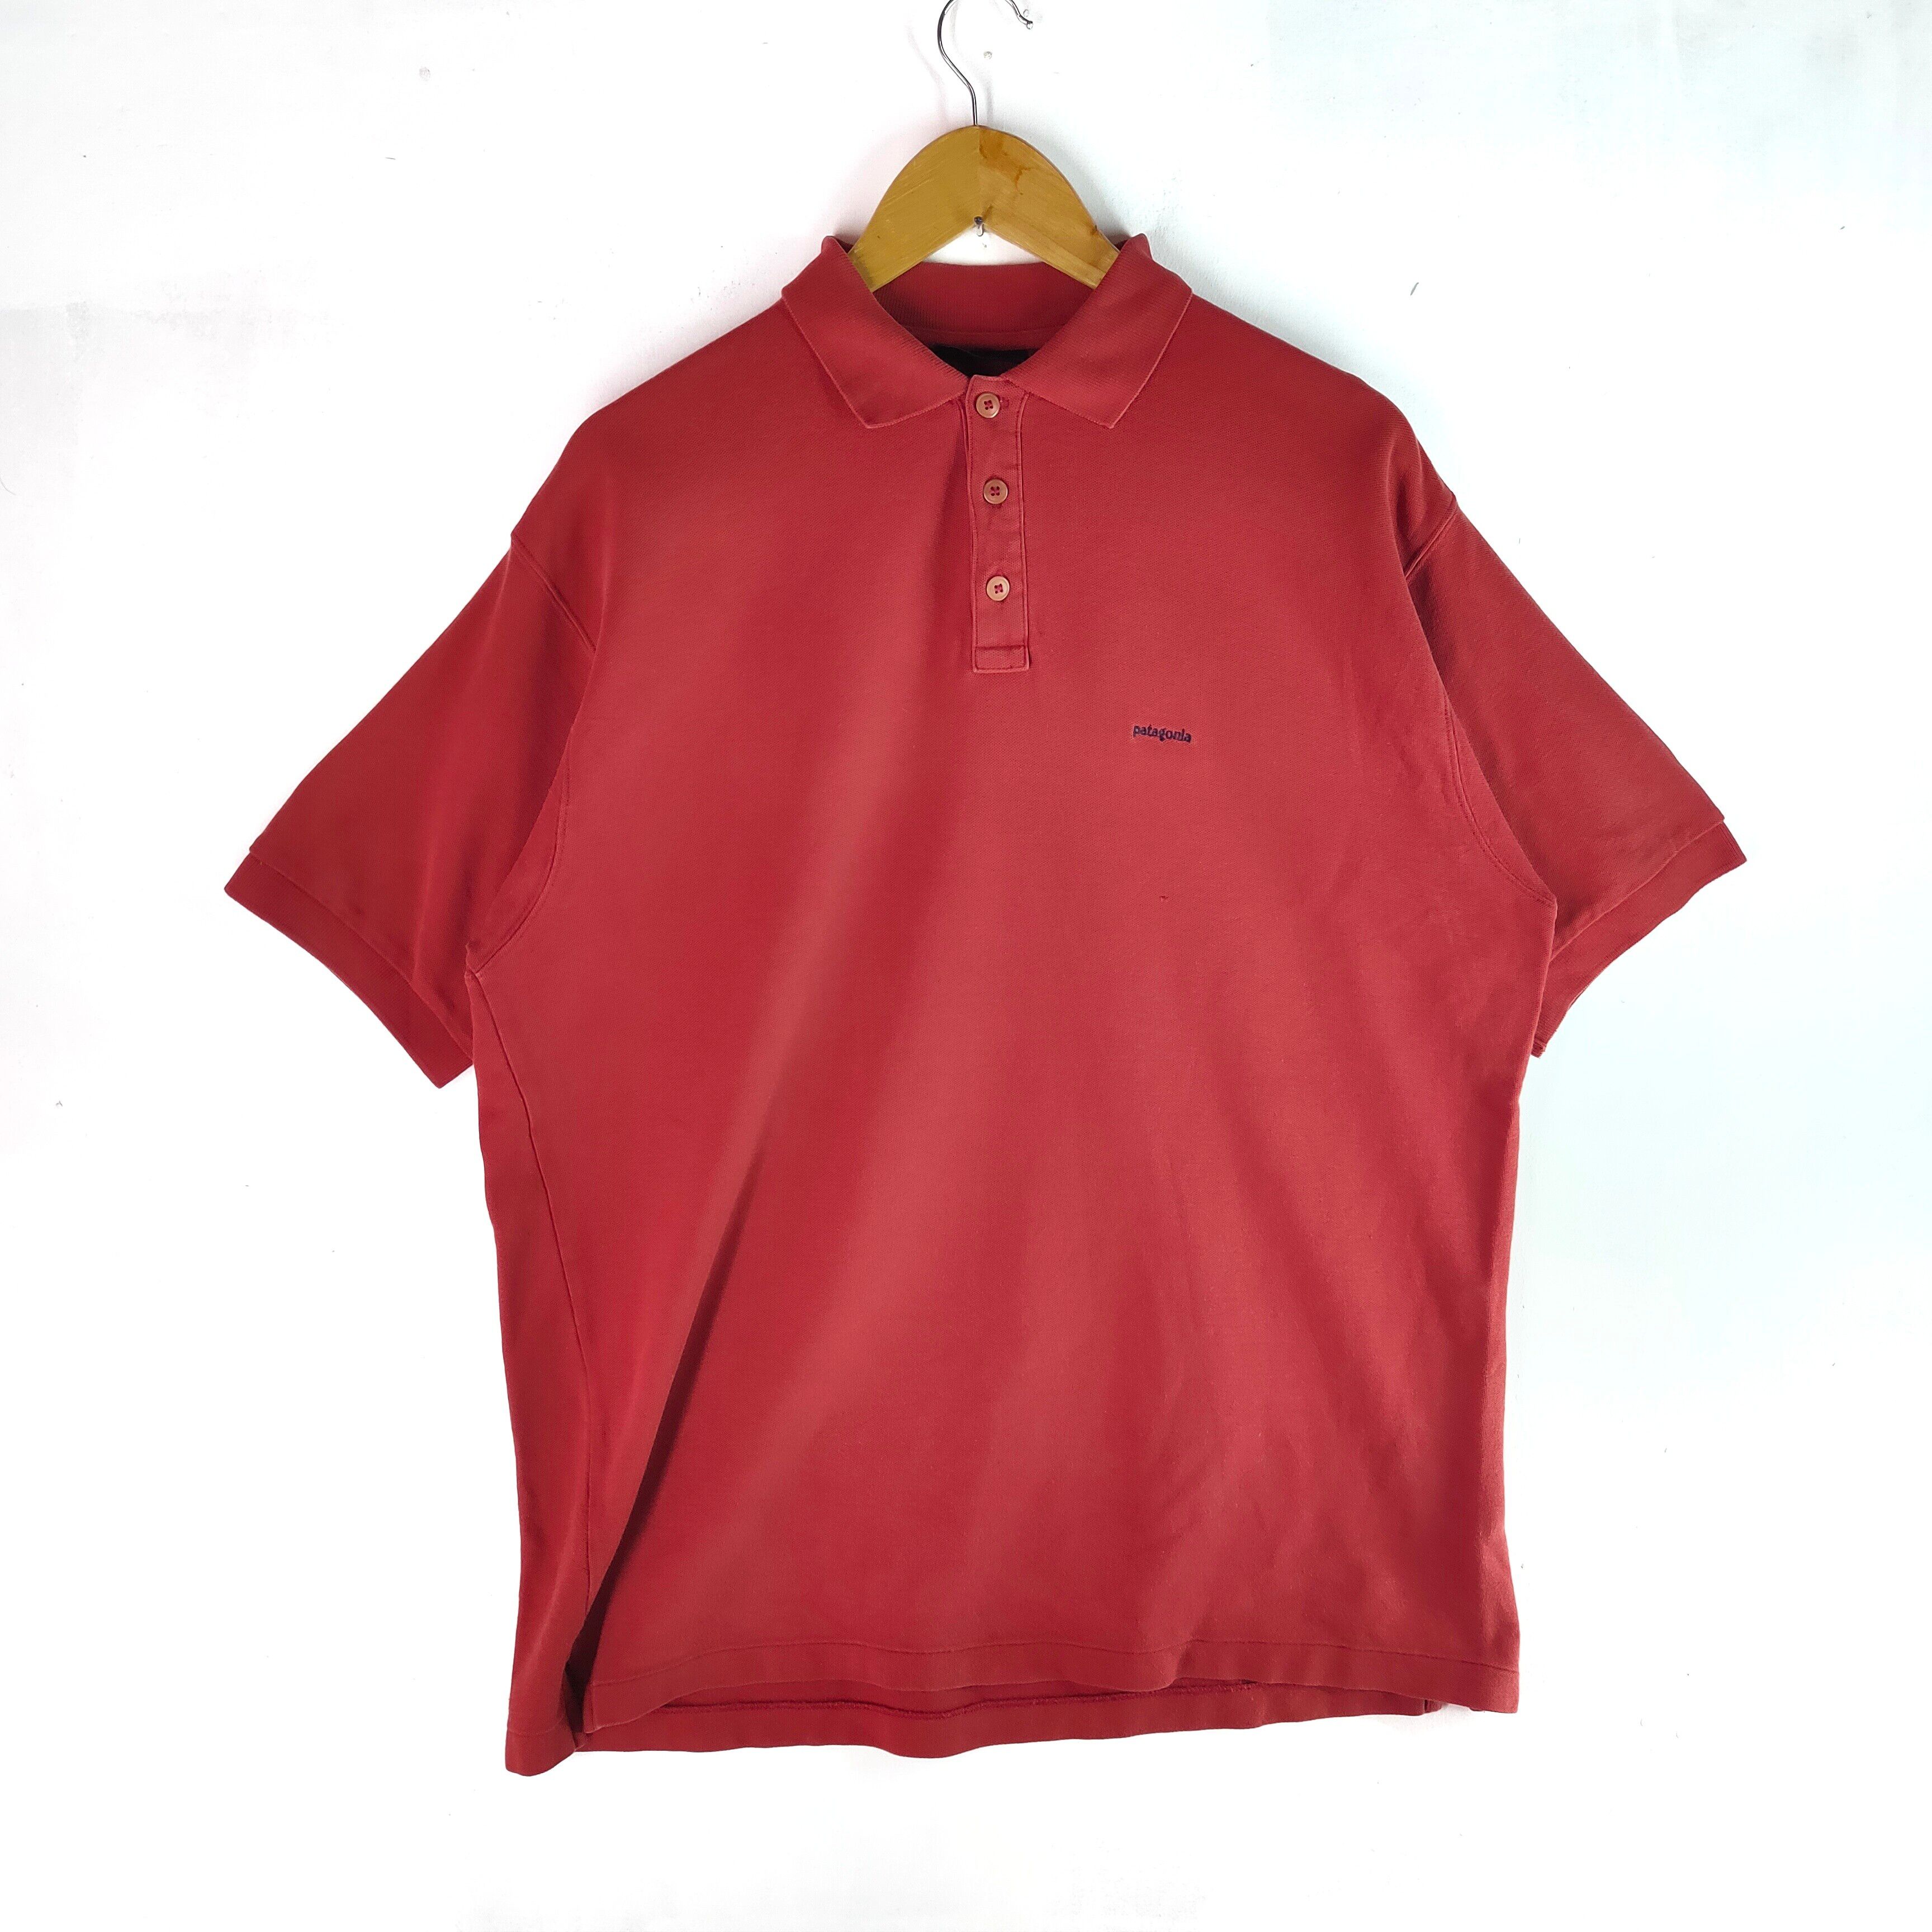 PATAGONIA Embroidery Small Spell Out Polo Shirt - 1